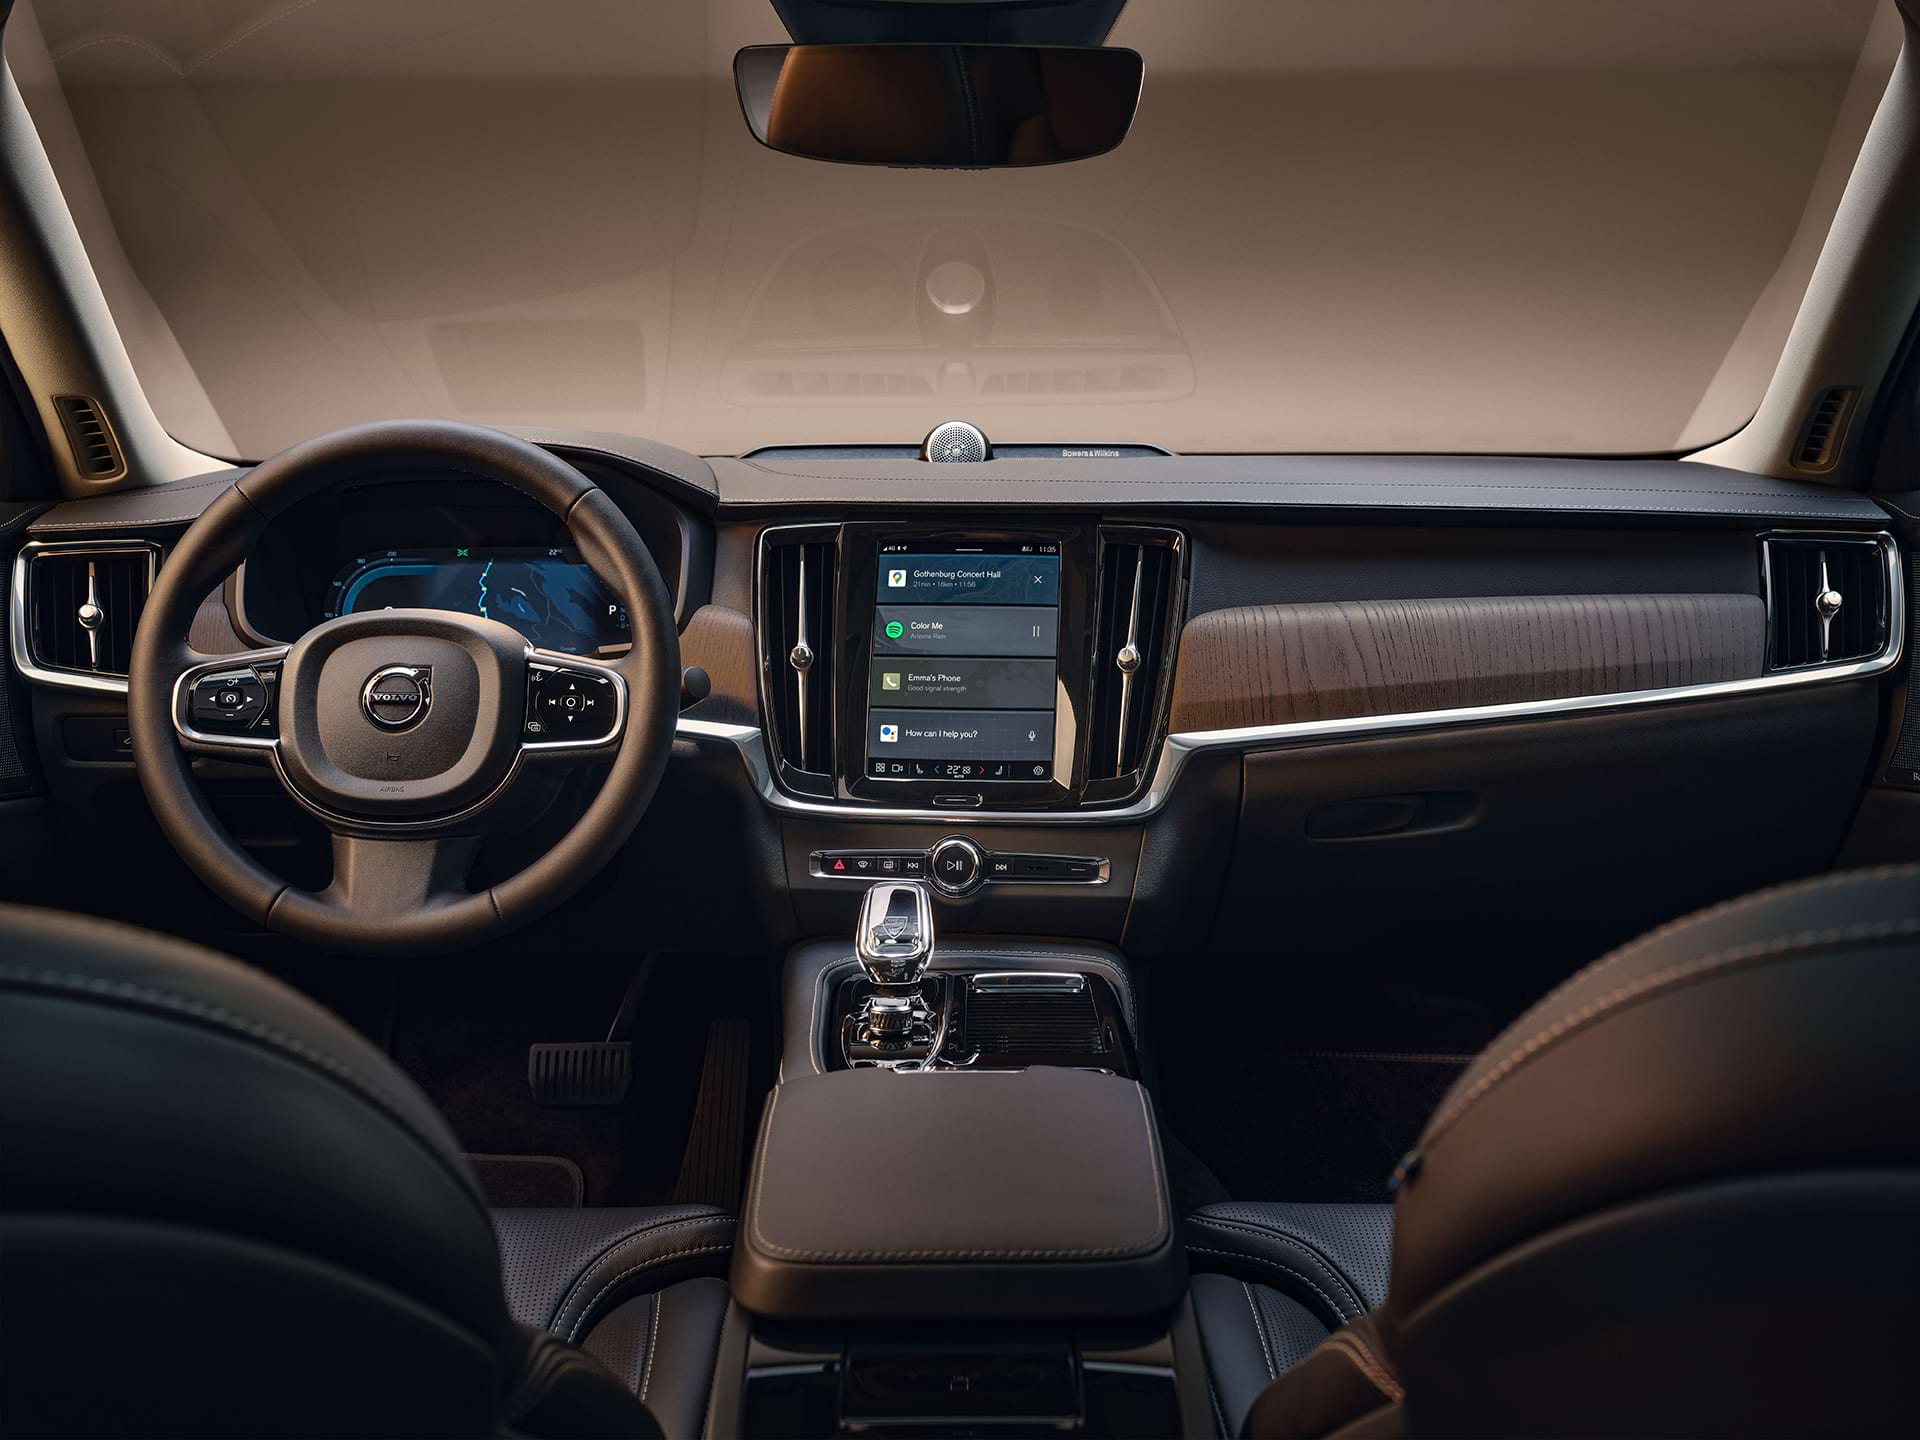 The dashboard, centre display, gear shifter, driver display and steering wheel of a Volvo sedan car.